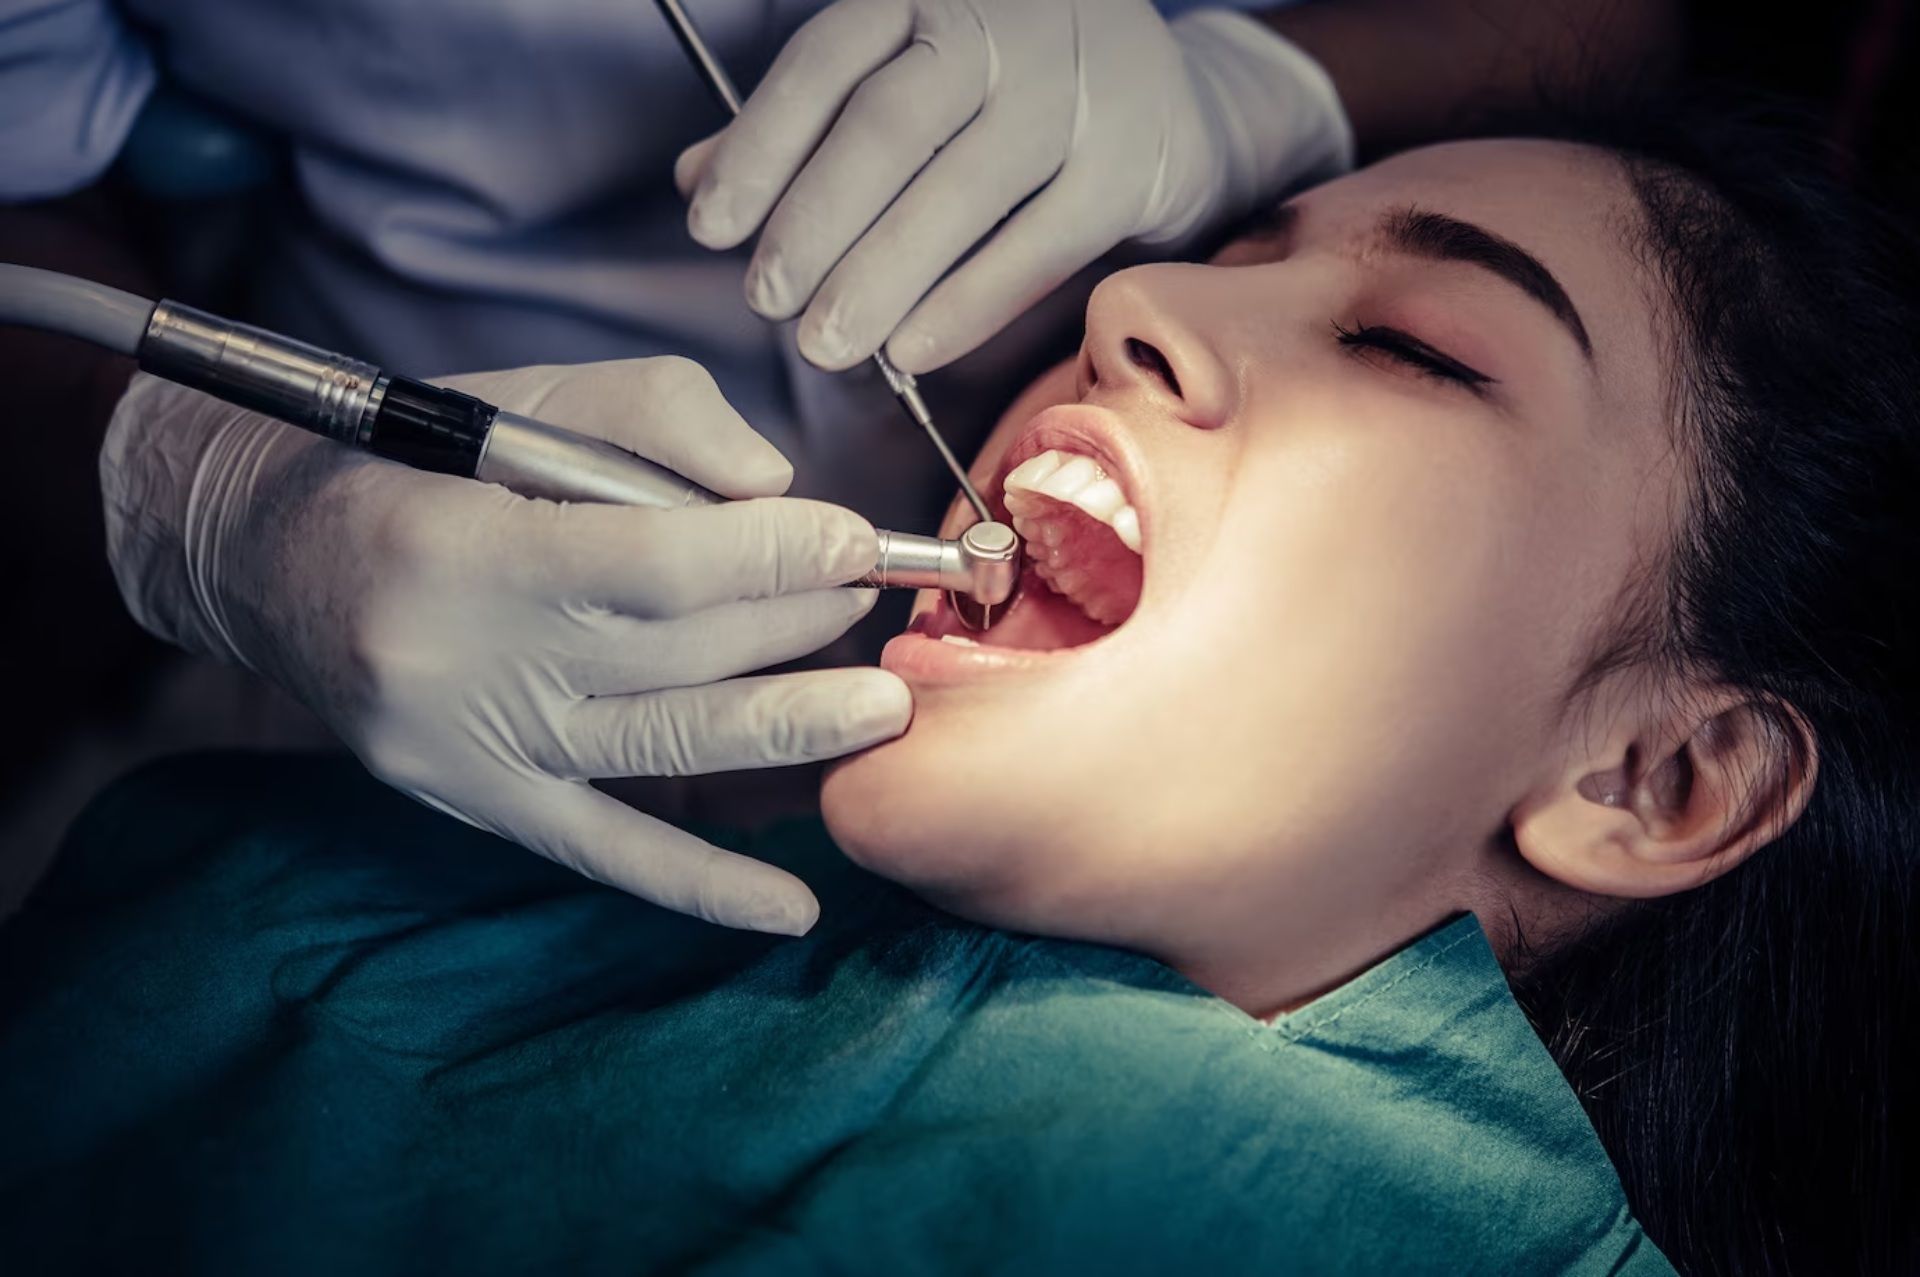 Tooth extractions